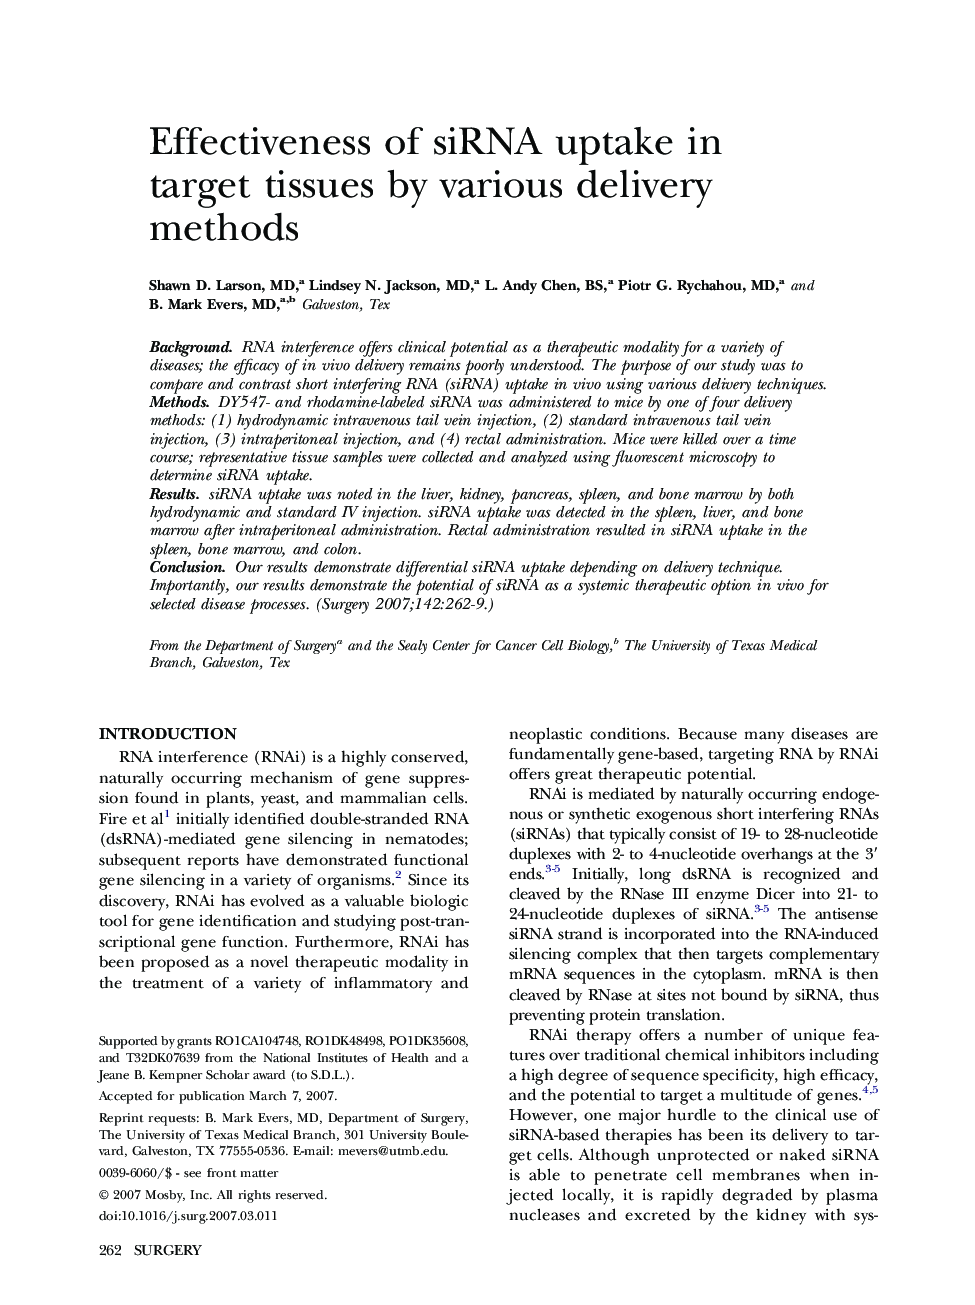 Effectiveness of siRNA uptake in target tissues by various delivery methods 